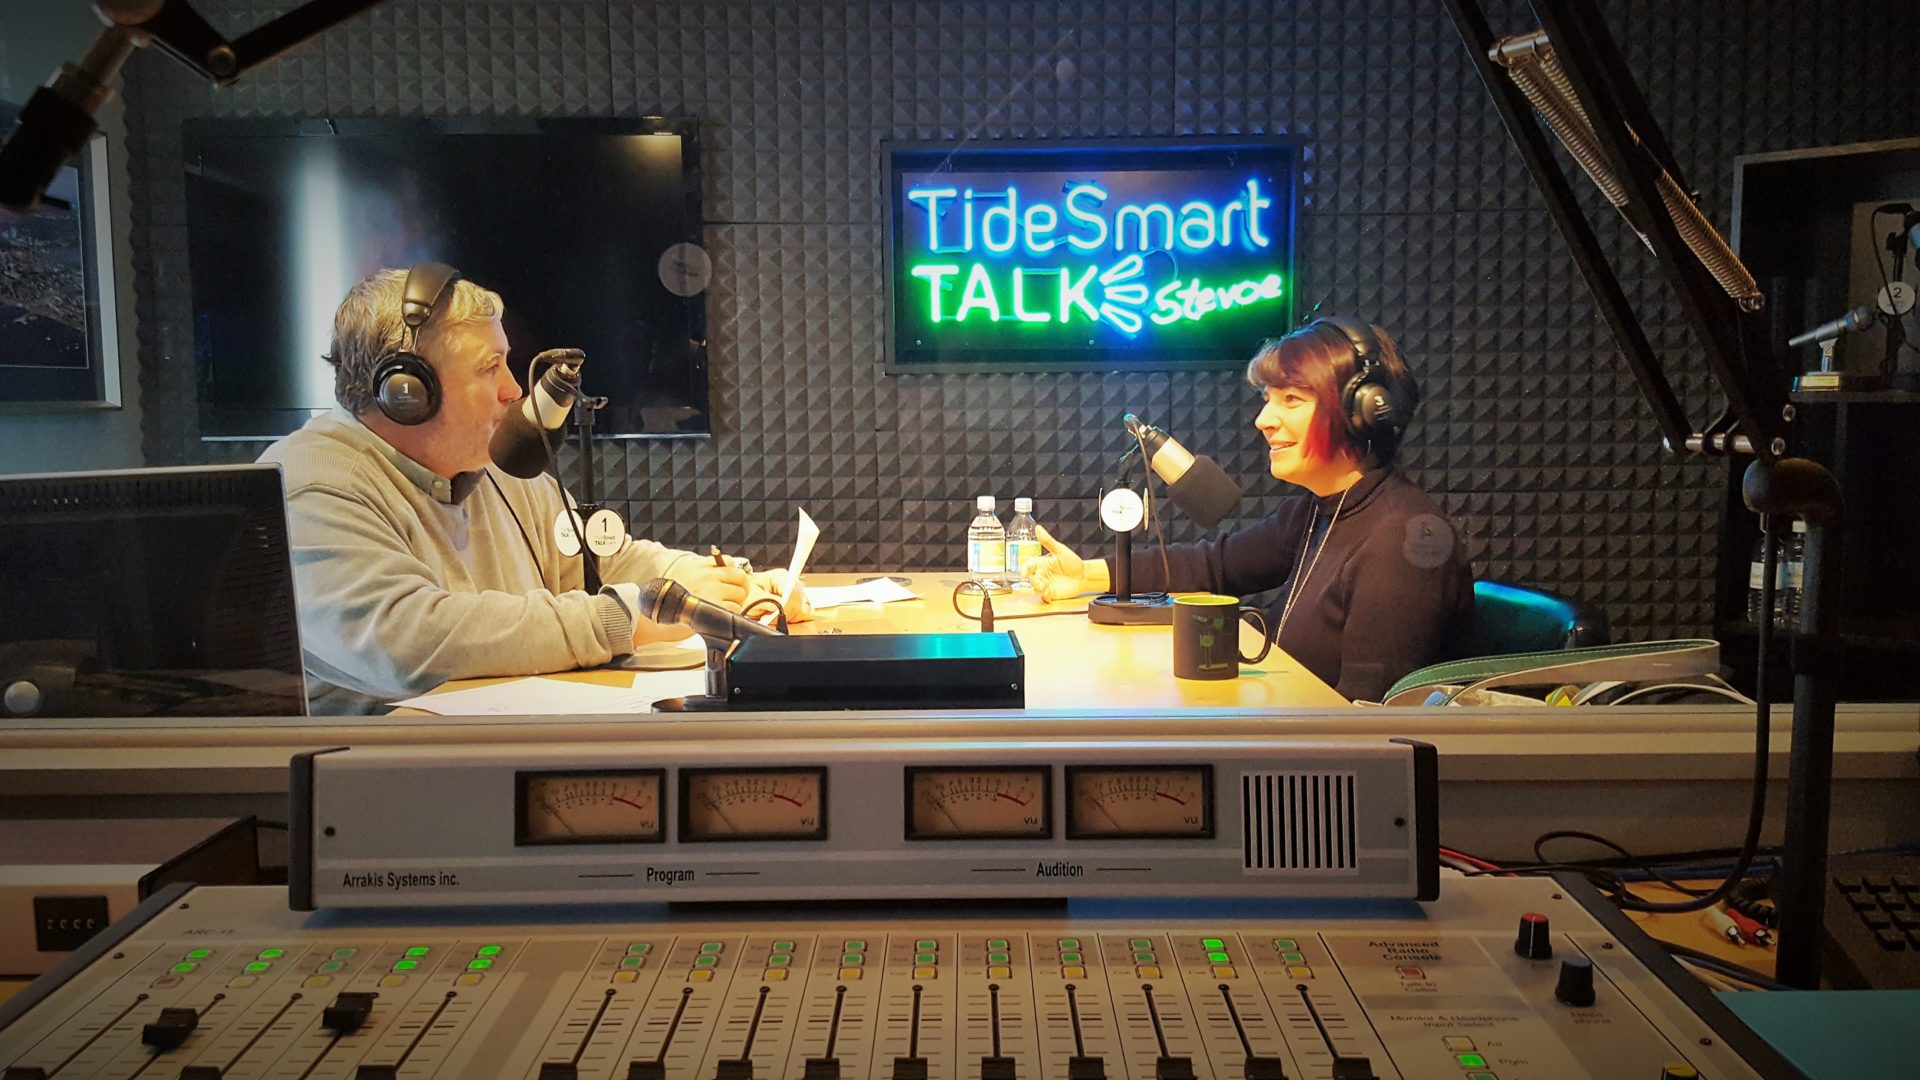 Host of TideSmart Talk with Stevoe, Steve Woods, welcomed Dr. Aileen Yingst, Senior Scientist with the Planetary Science Institute (at right).